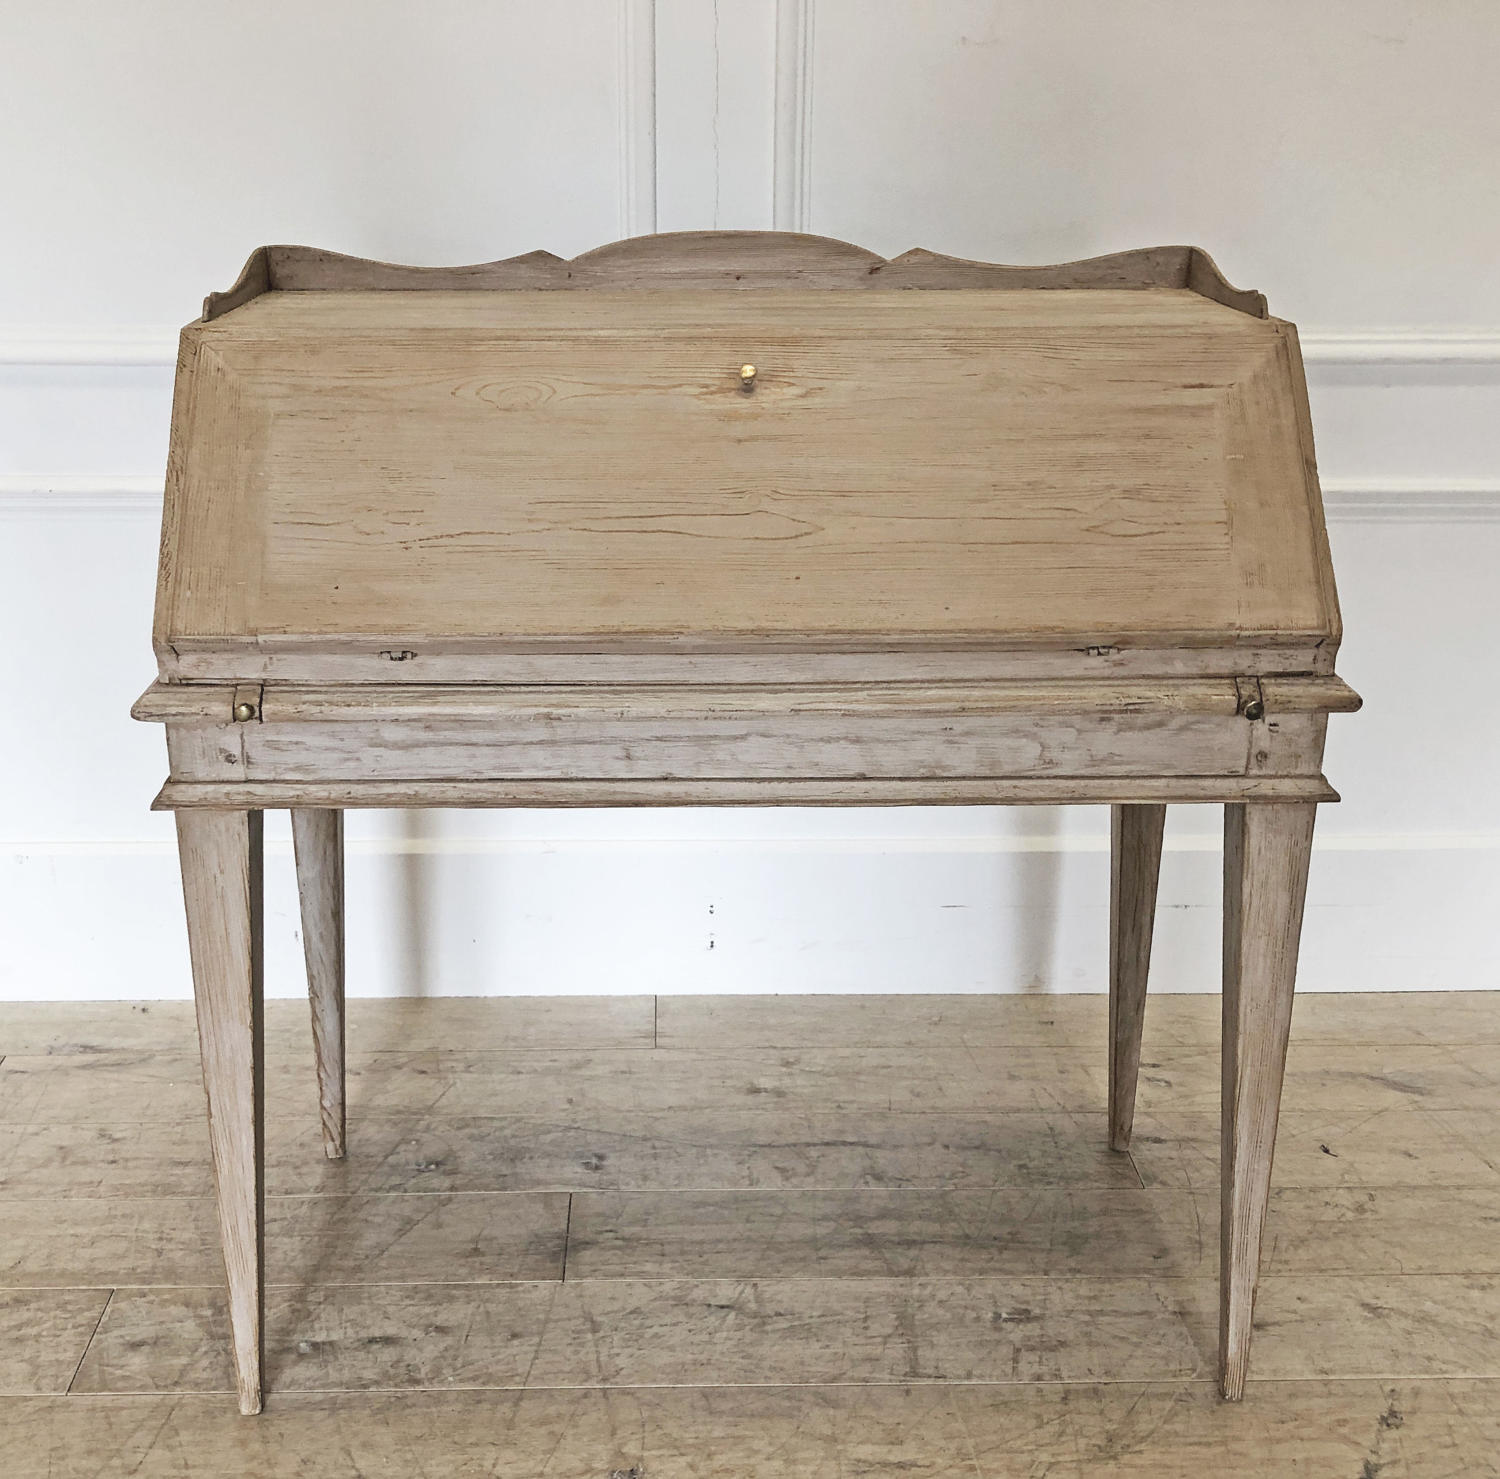 19th c French Slope-topped Desk - circa 1880